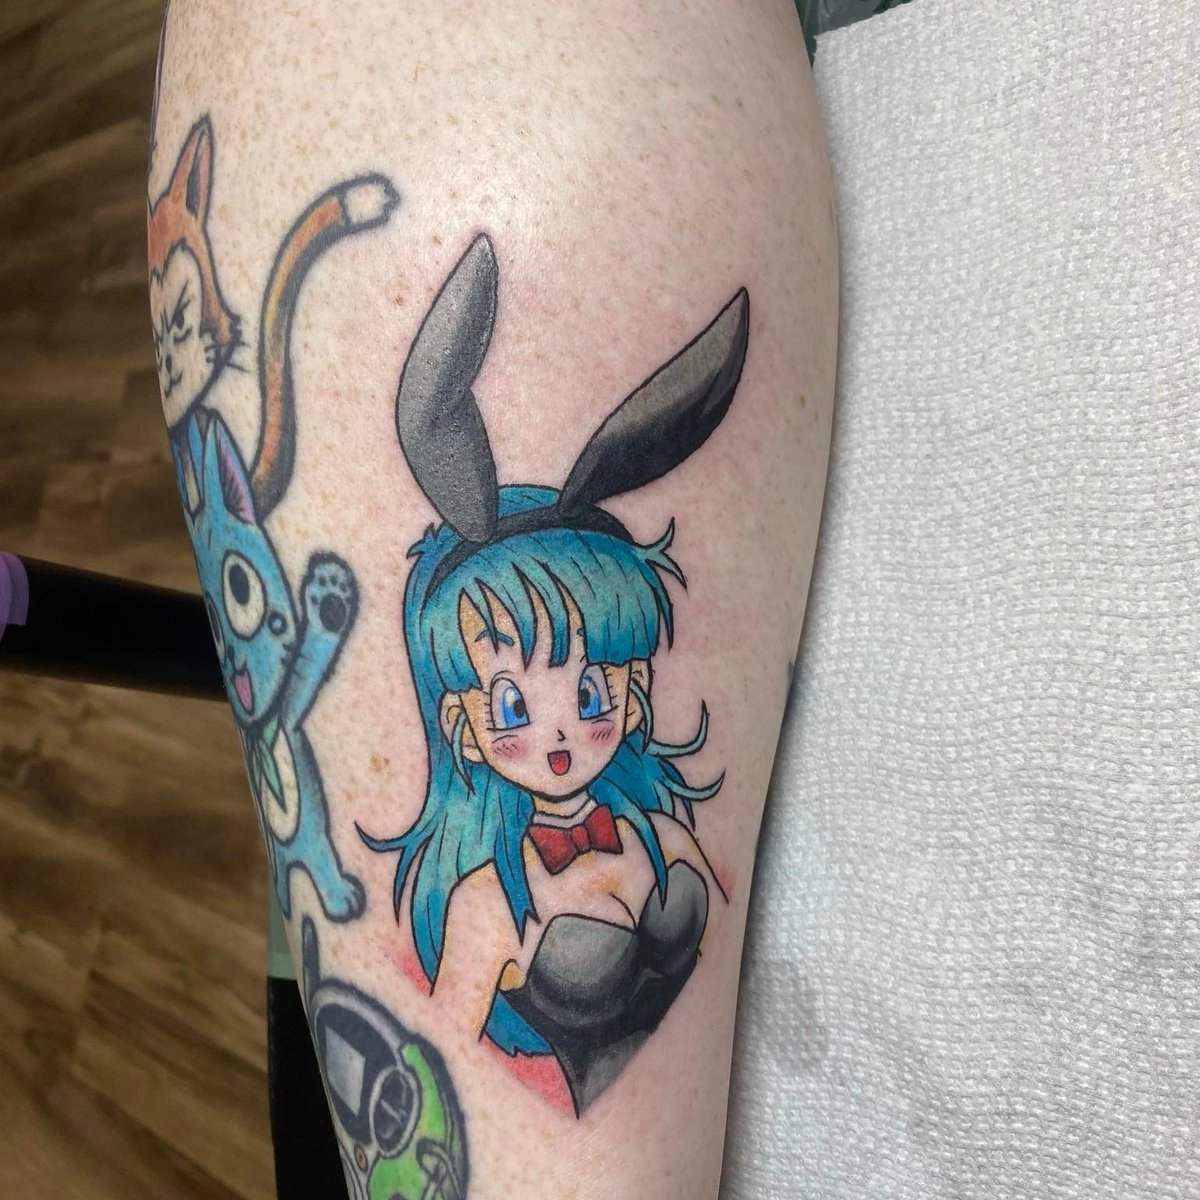 I've been meaning to get a Dragon Ball tattoo for a long time and finally did a couple days ago! #bunnygirl #Bulma #DragonBall #capsulecorp #tattoo #anime